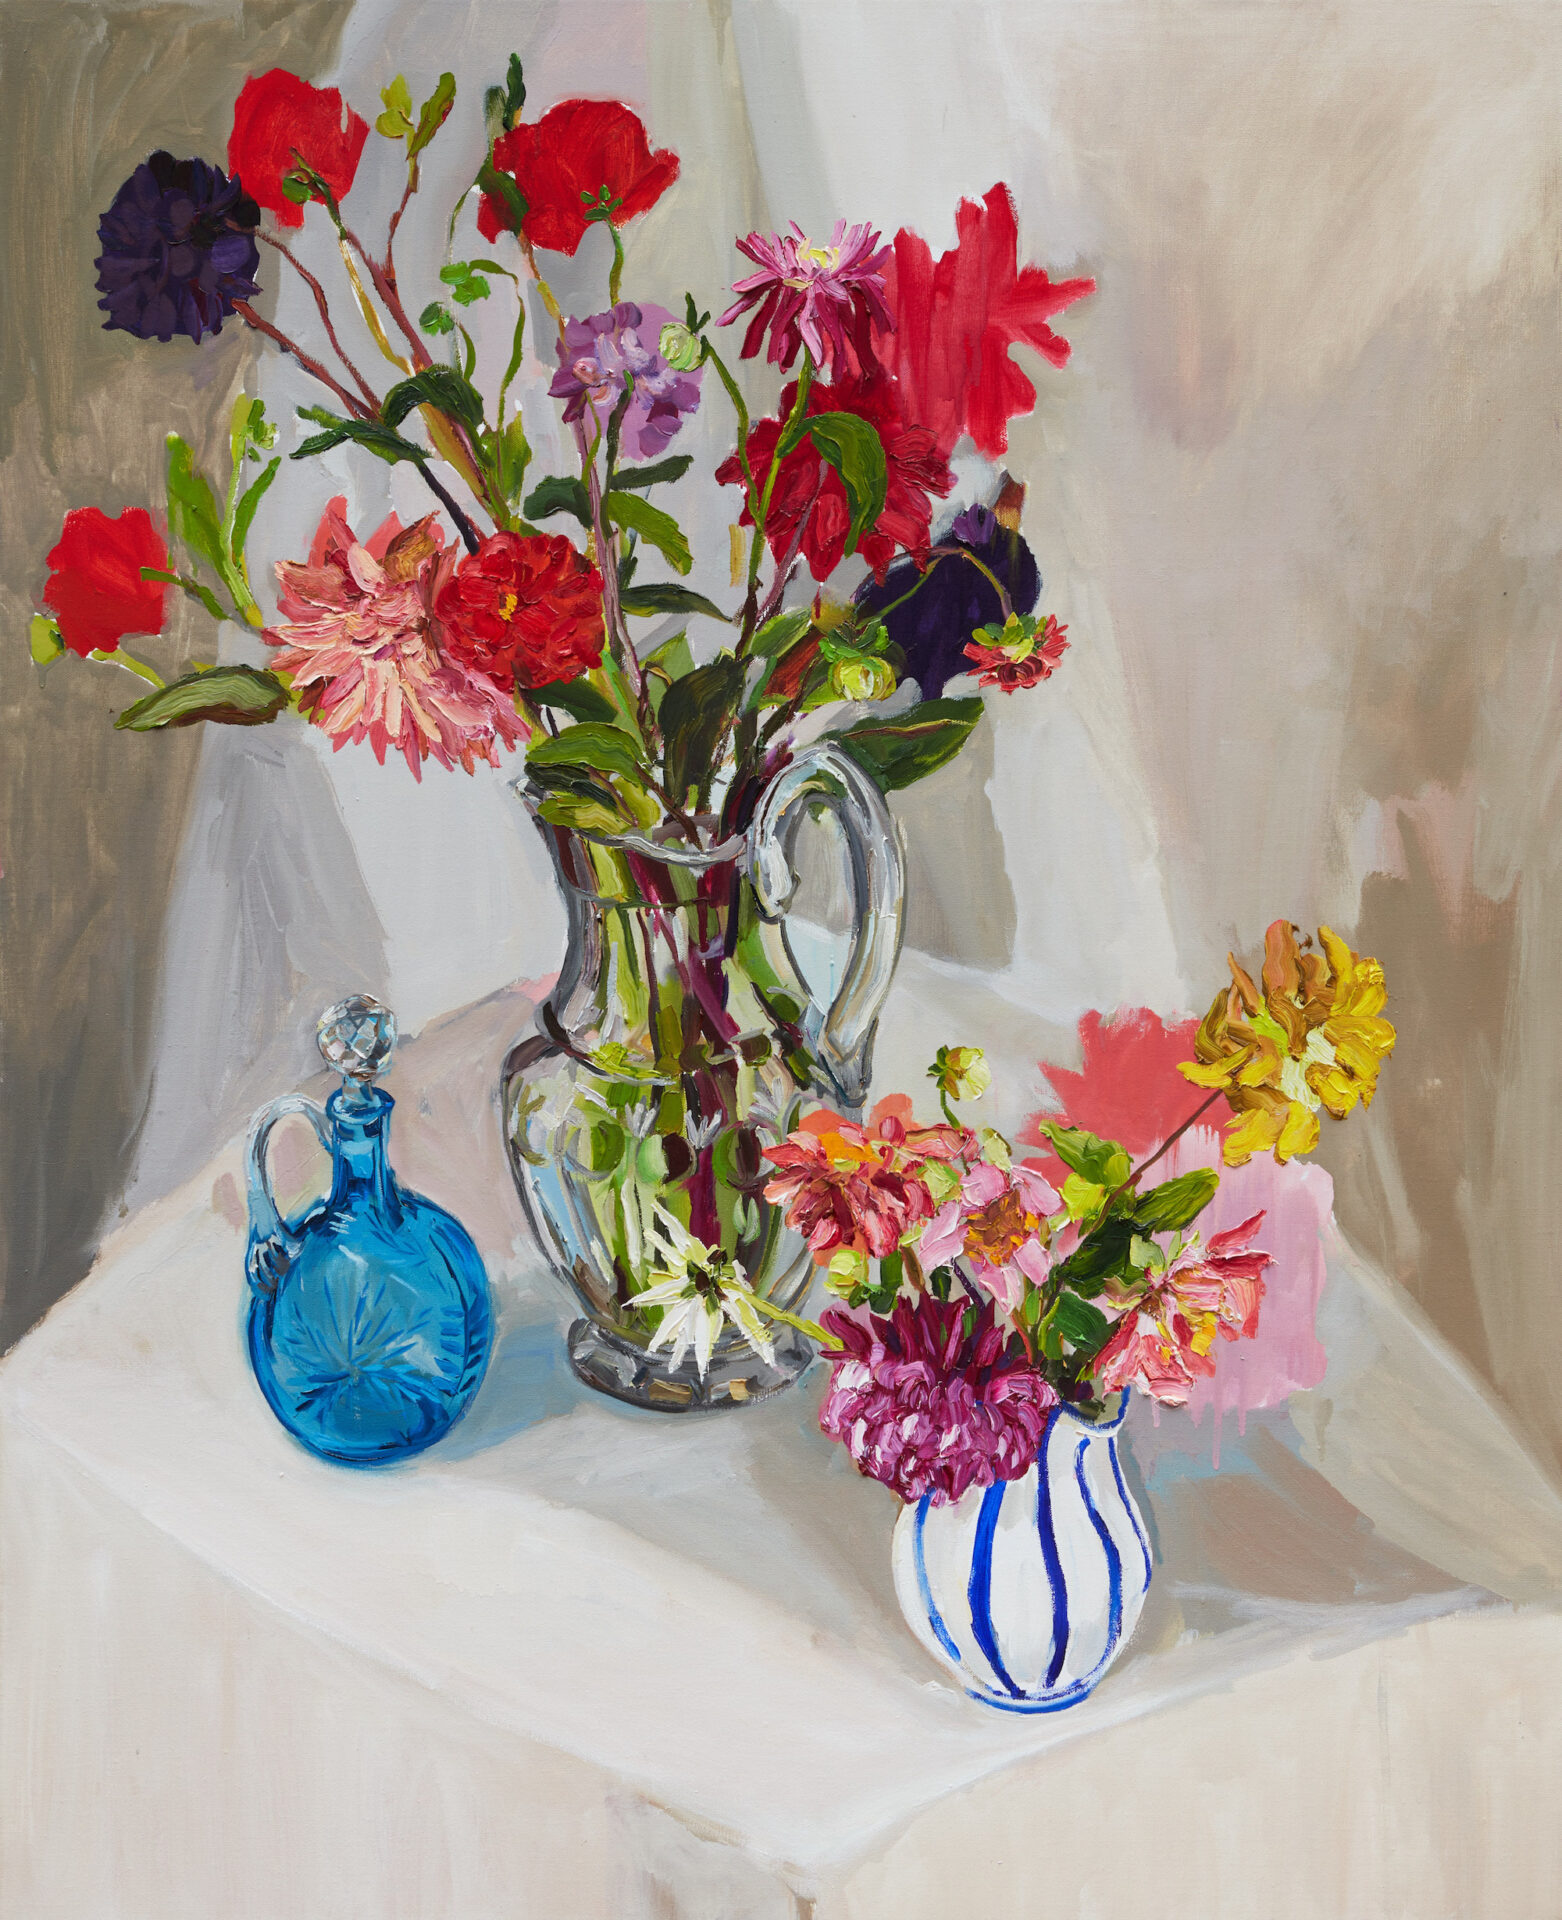 Dahlia’s with blue crystal and striped jug